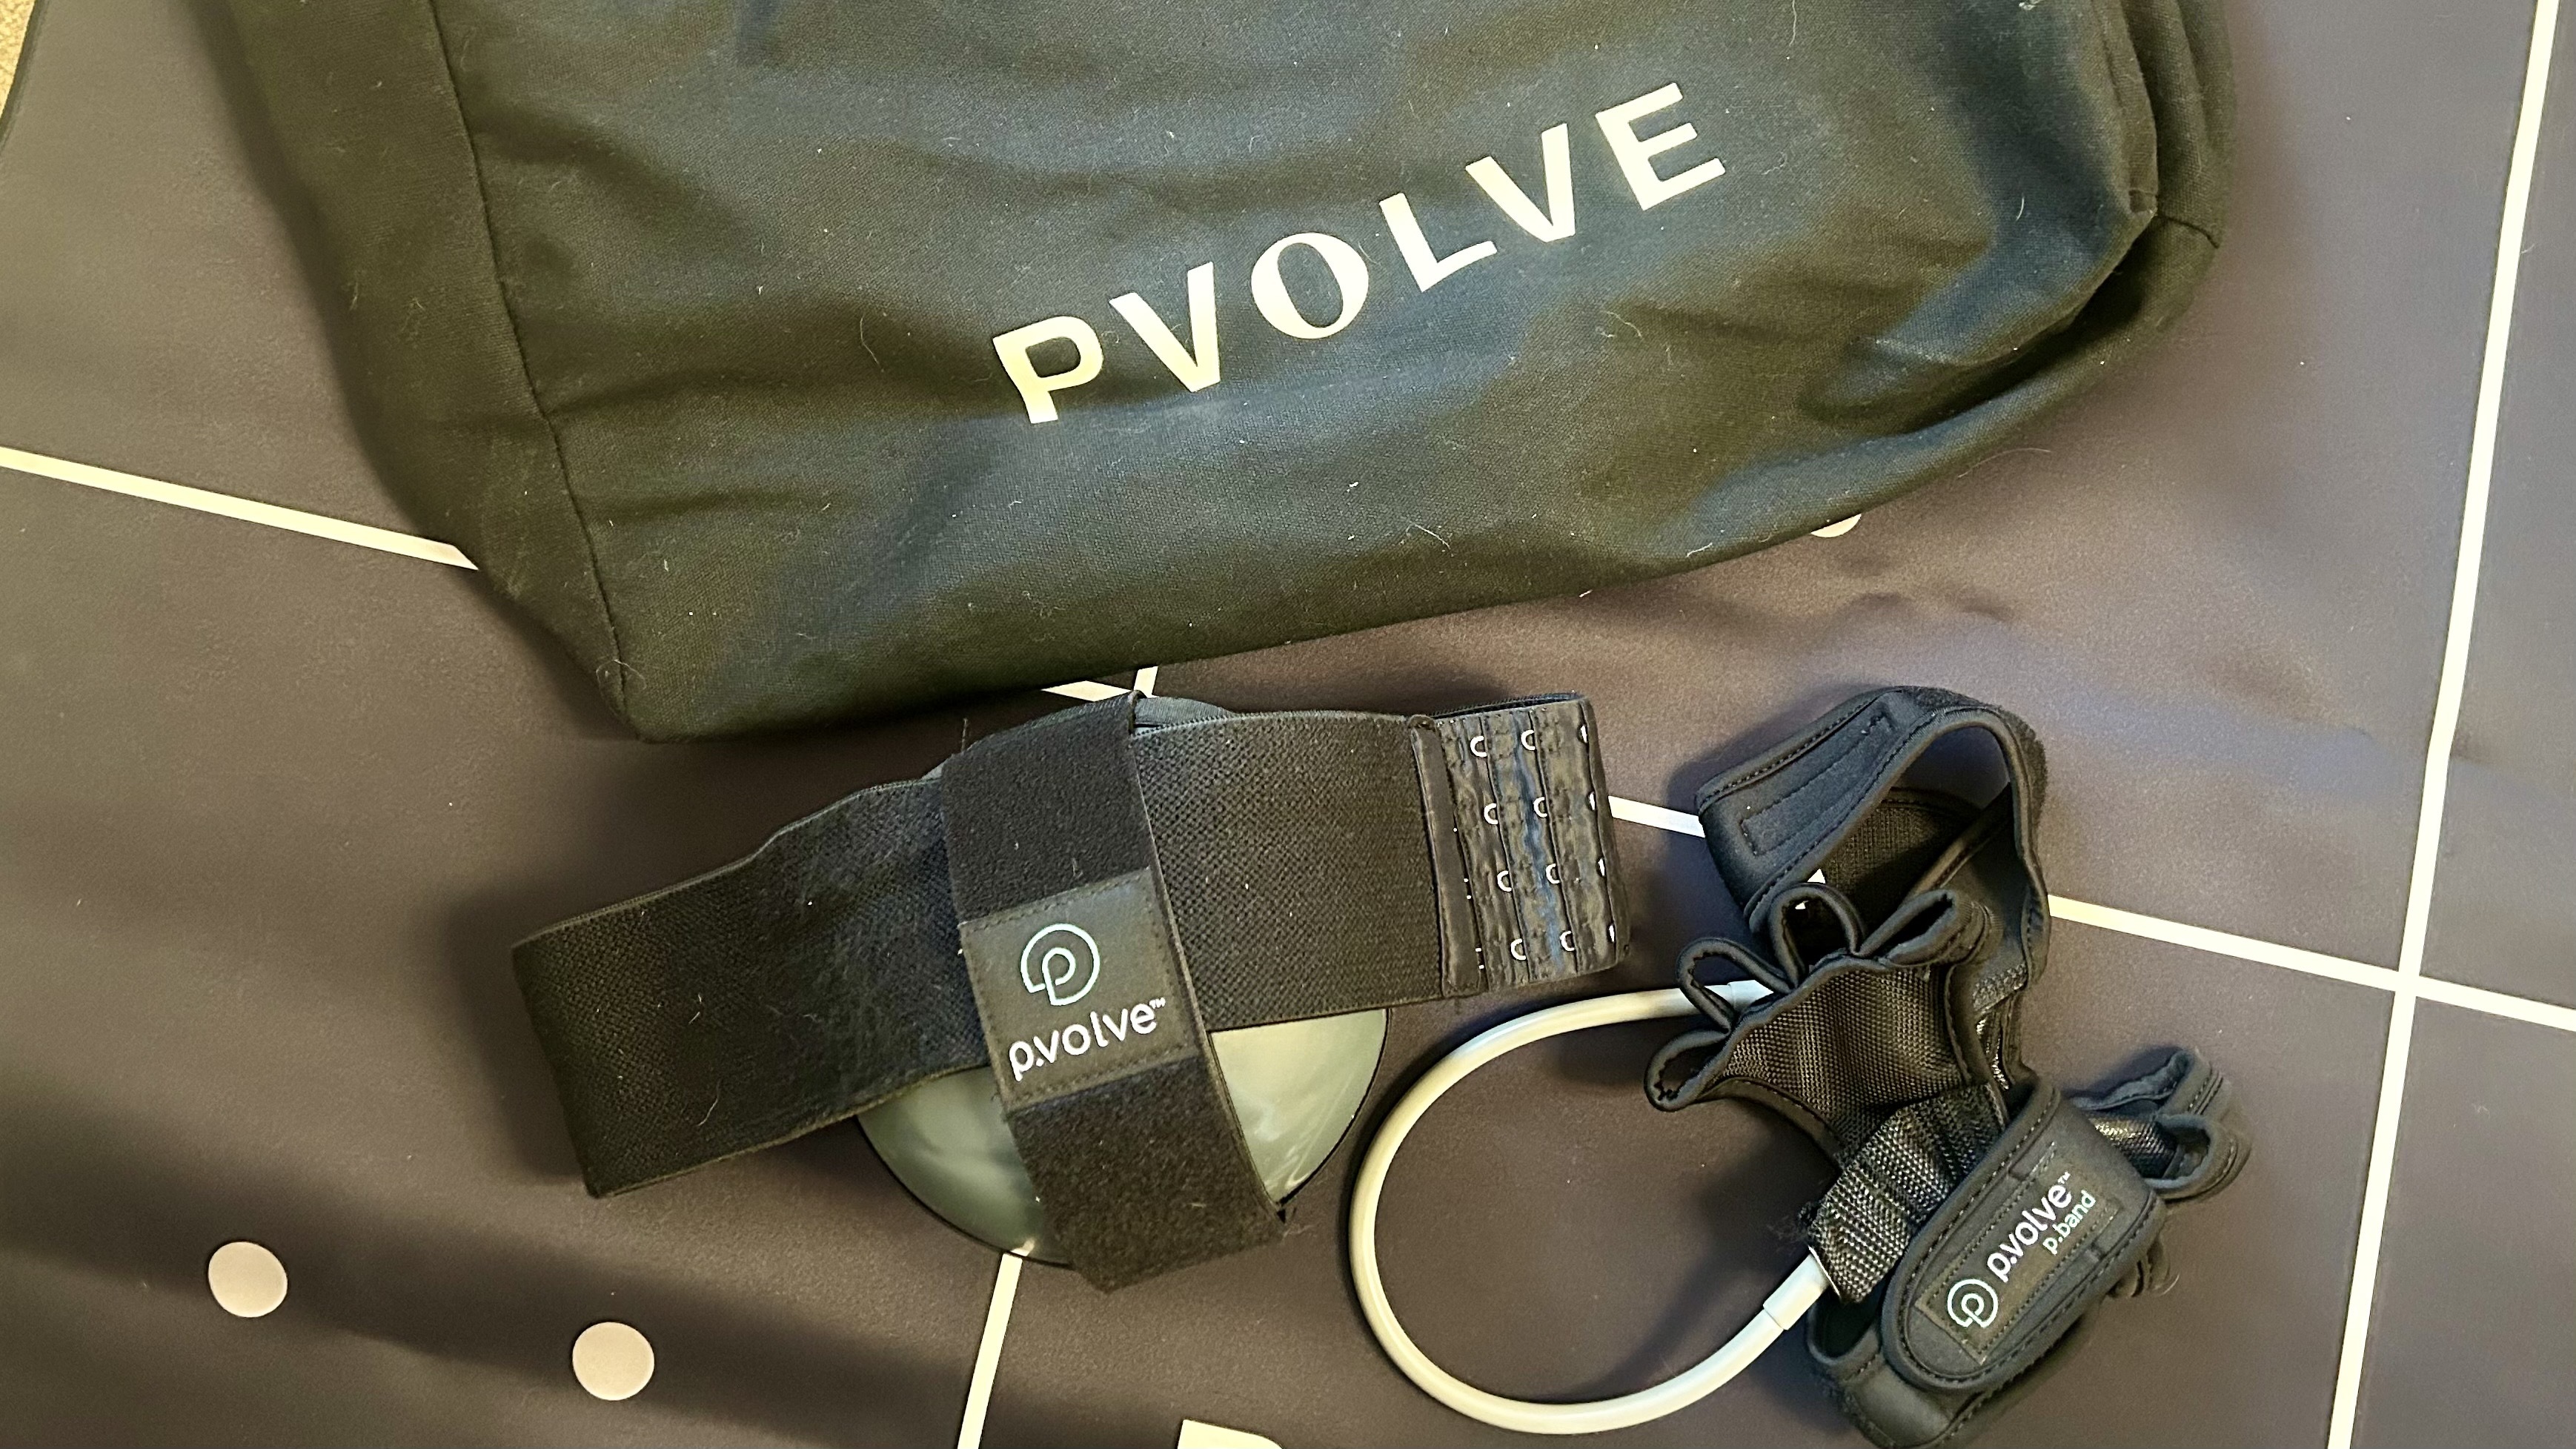 a photo of the pvolve ball, pvolve band and pvolve bag